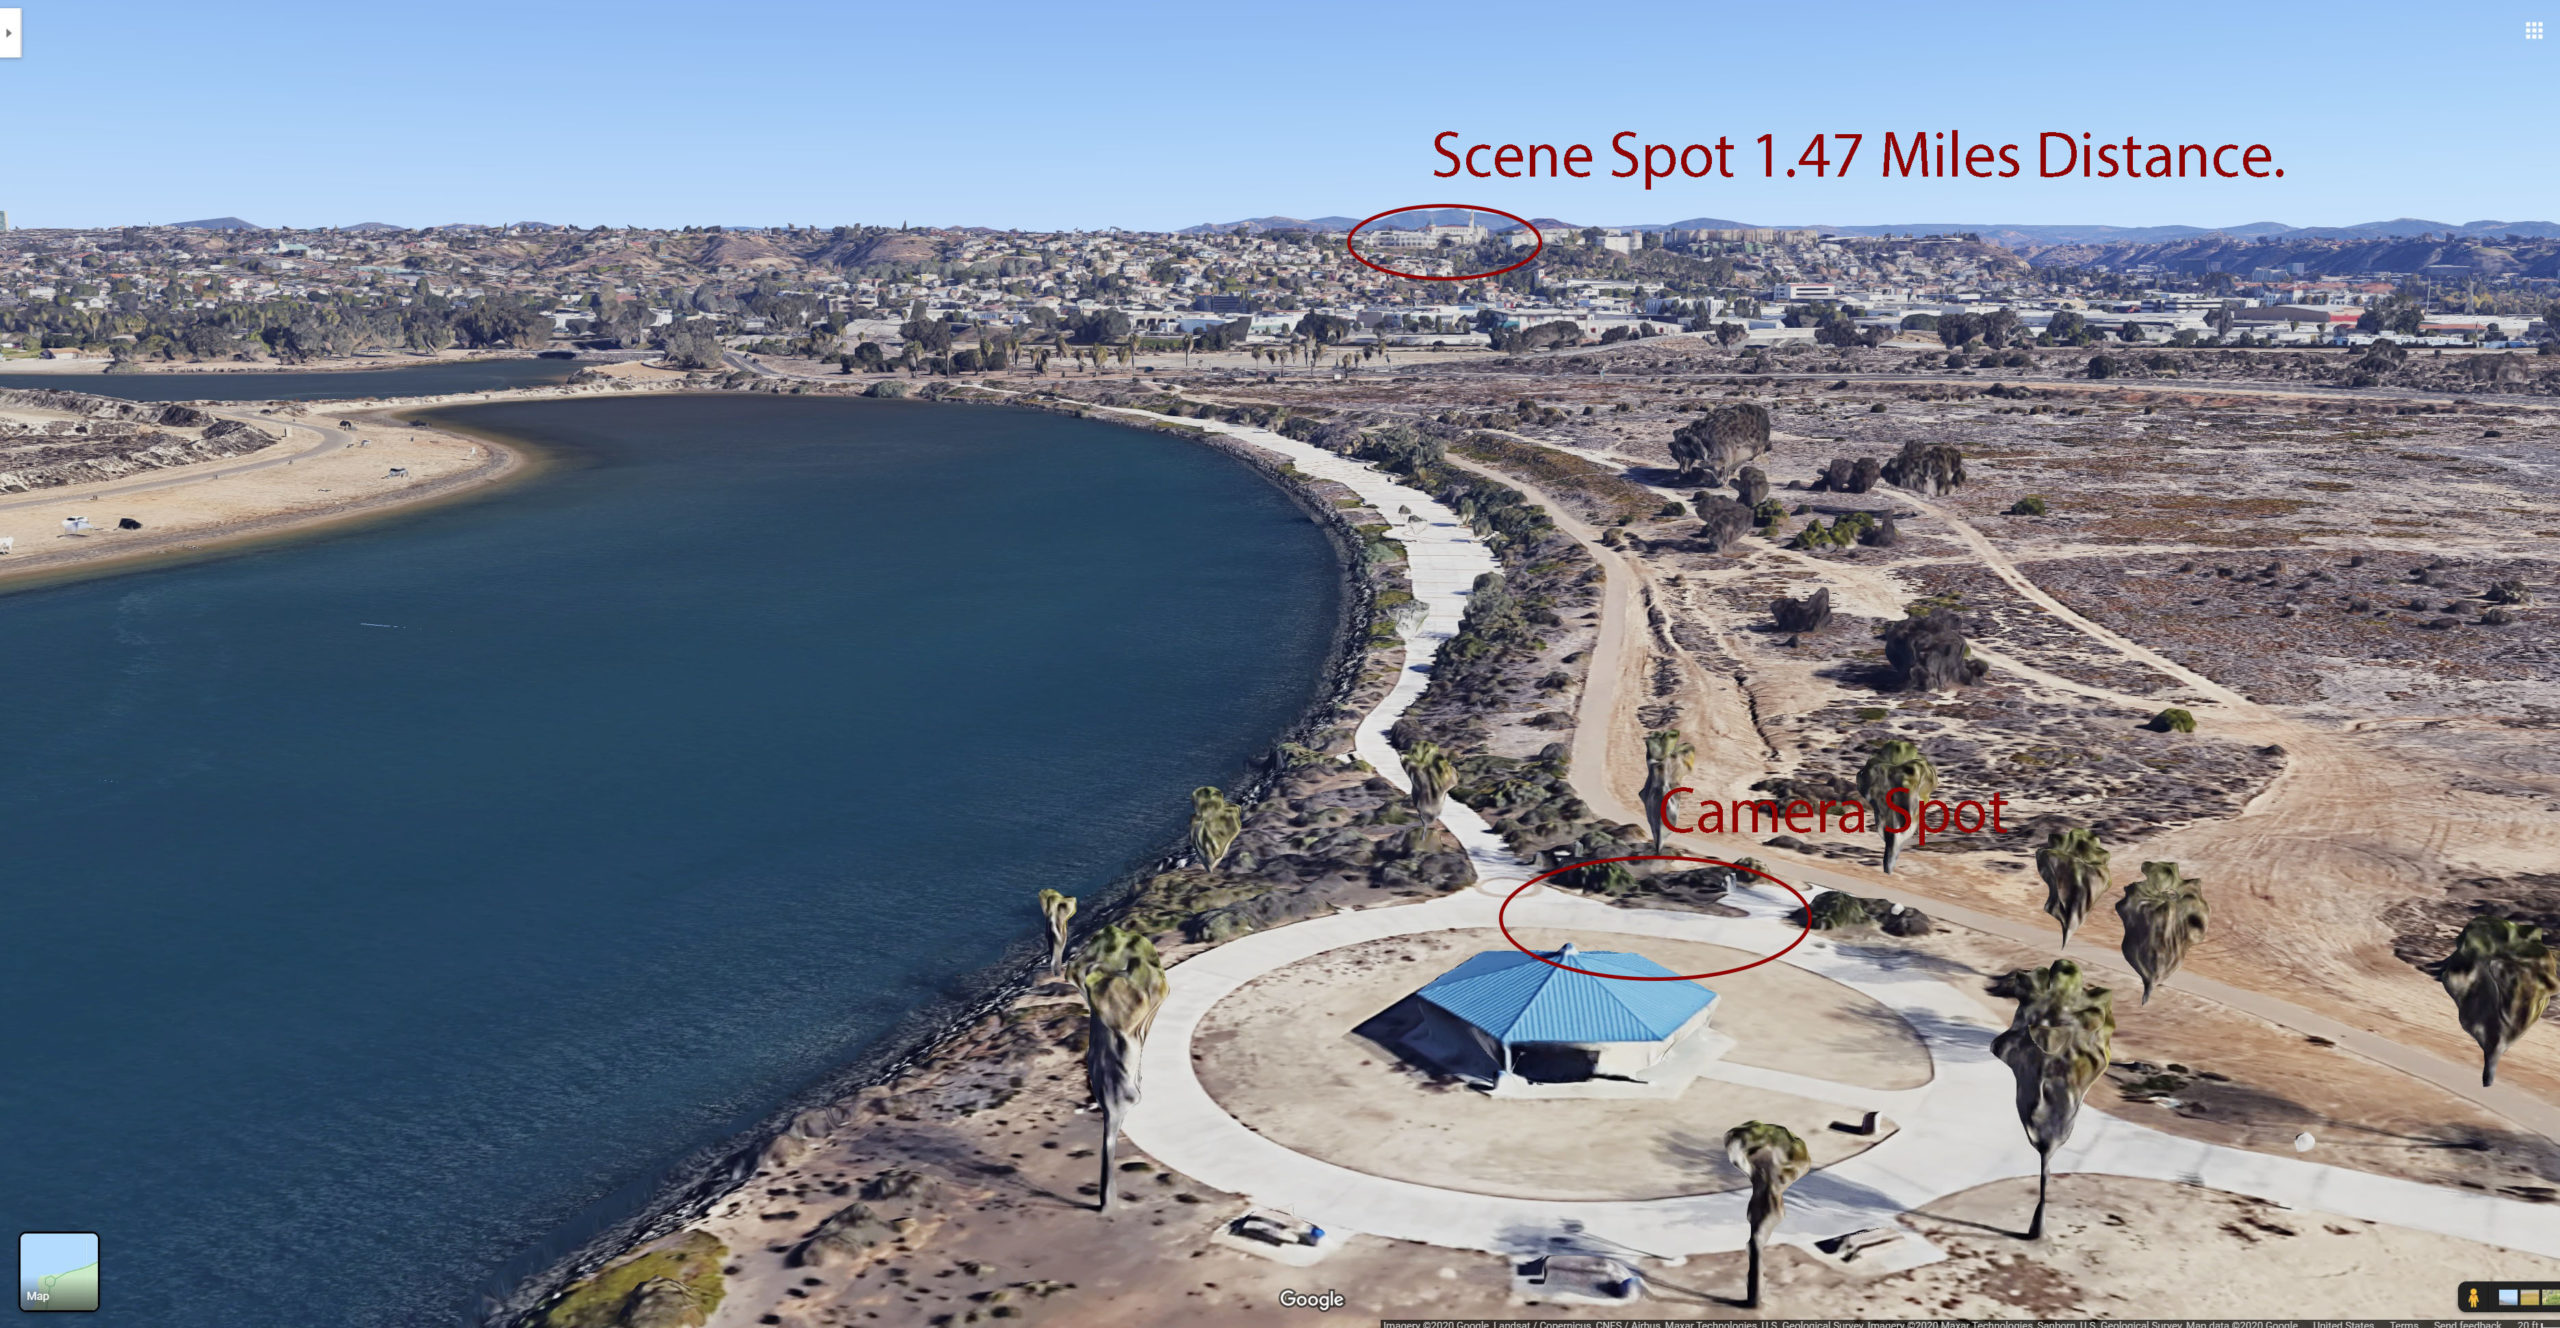 3D View of the area I am shooting